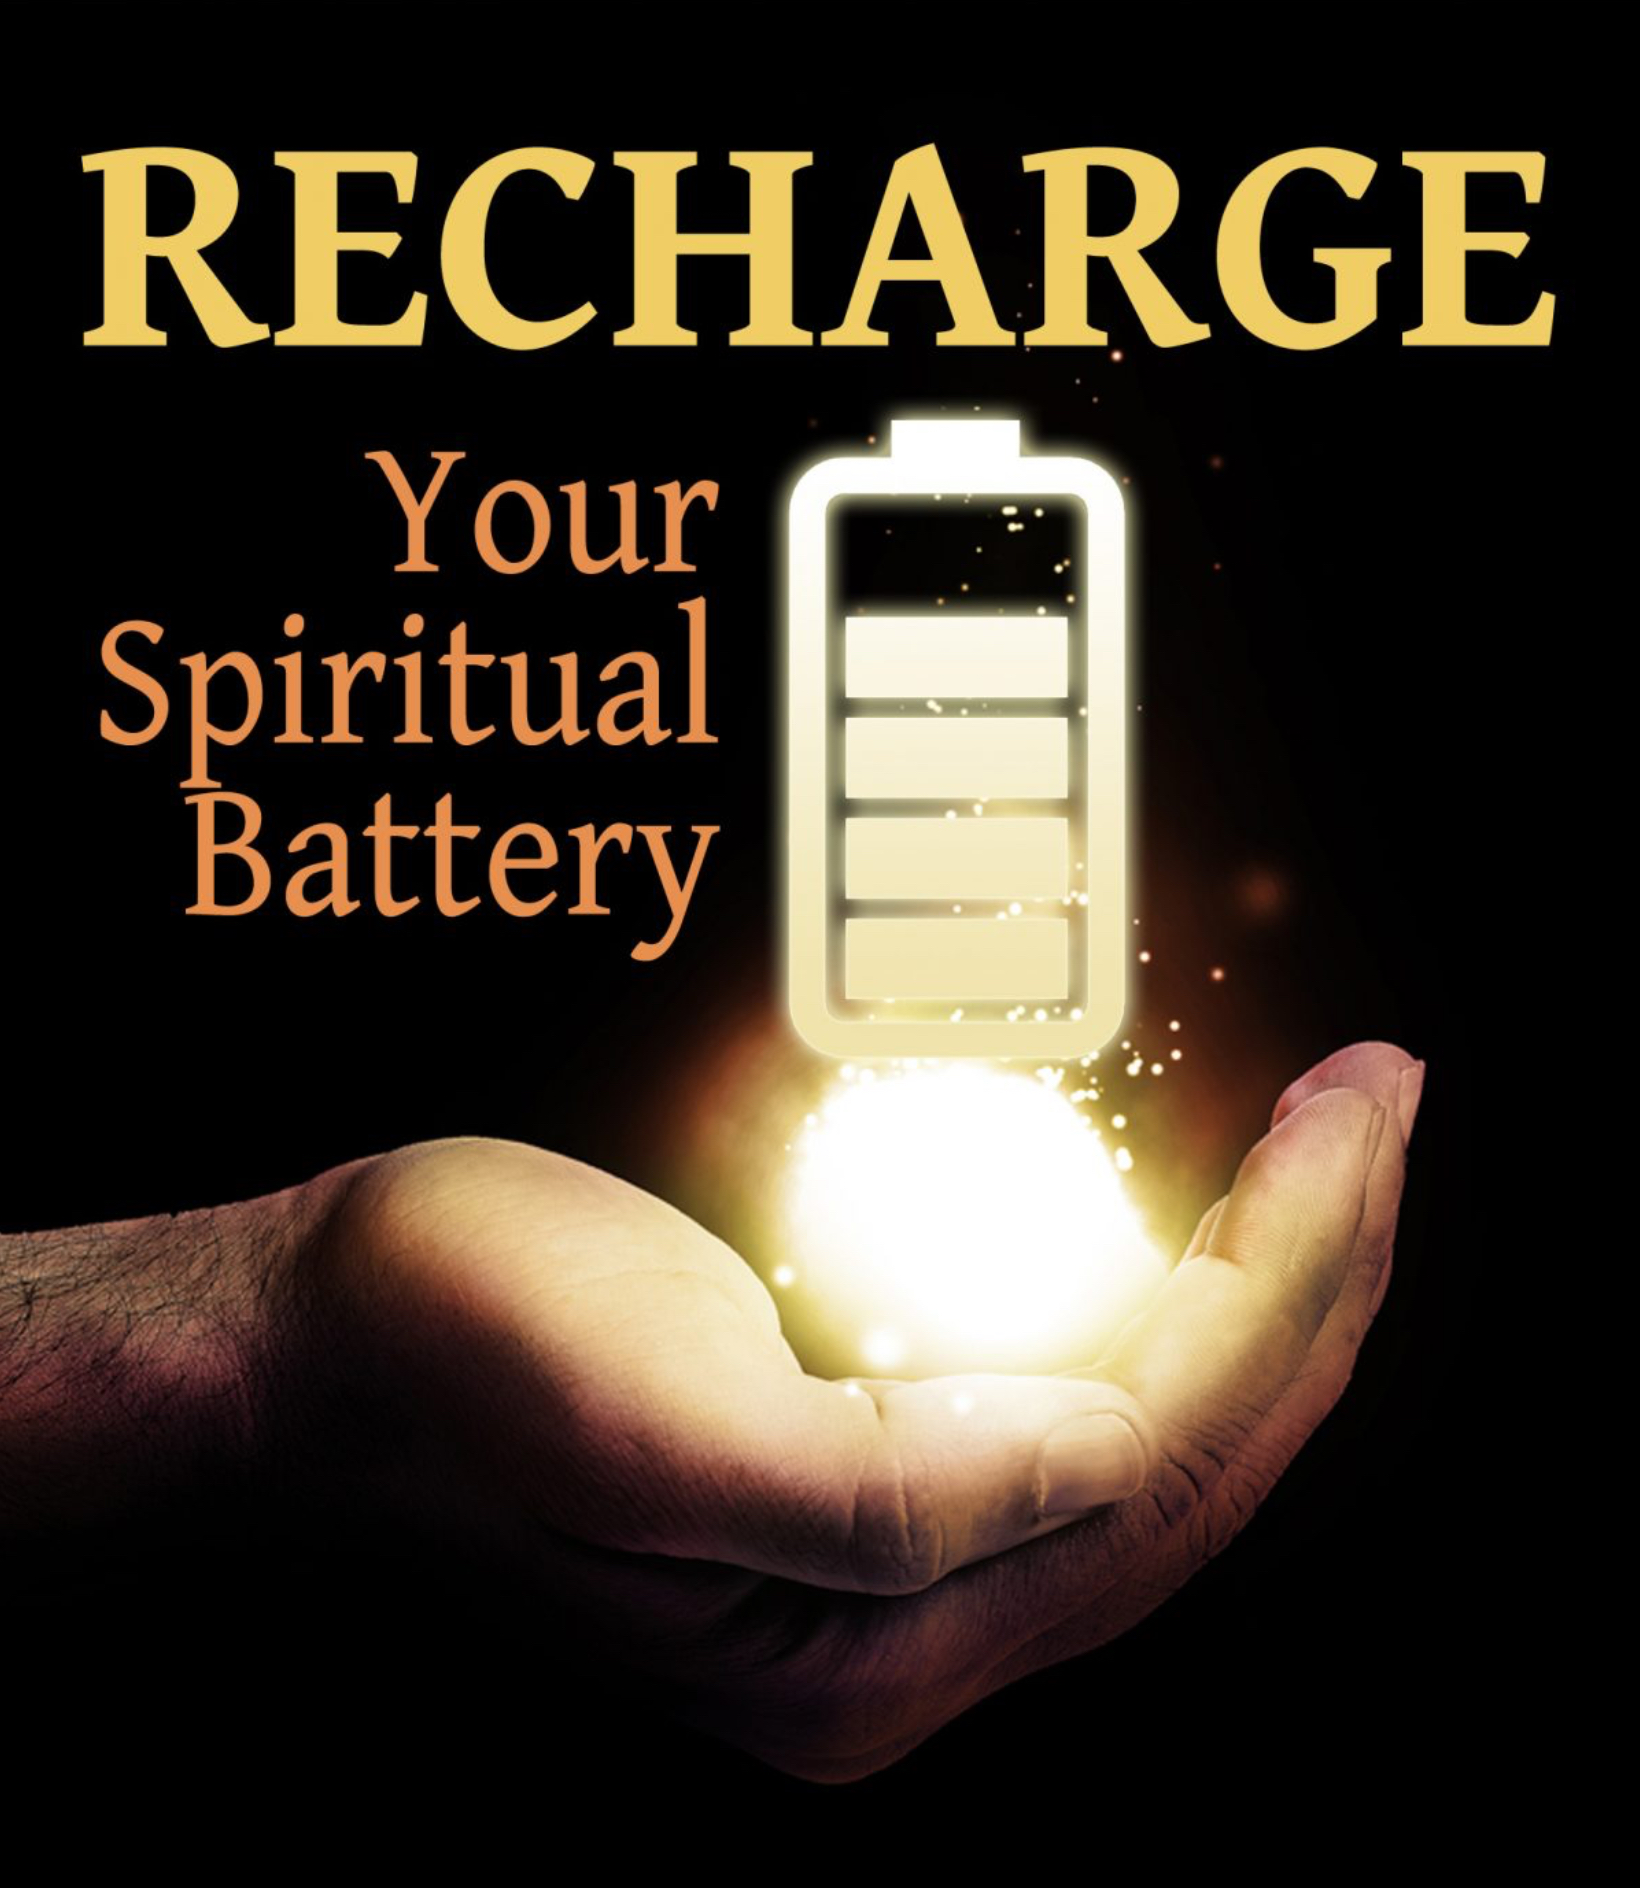 Recharge your batteries